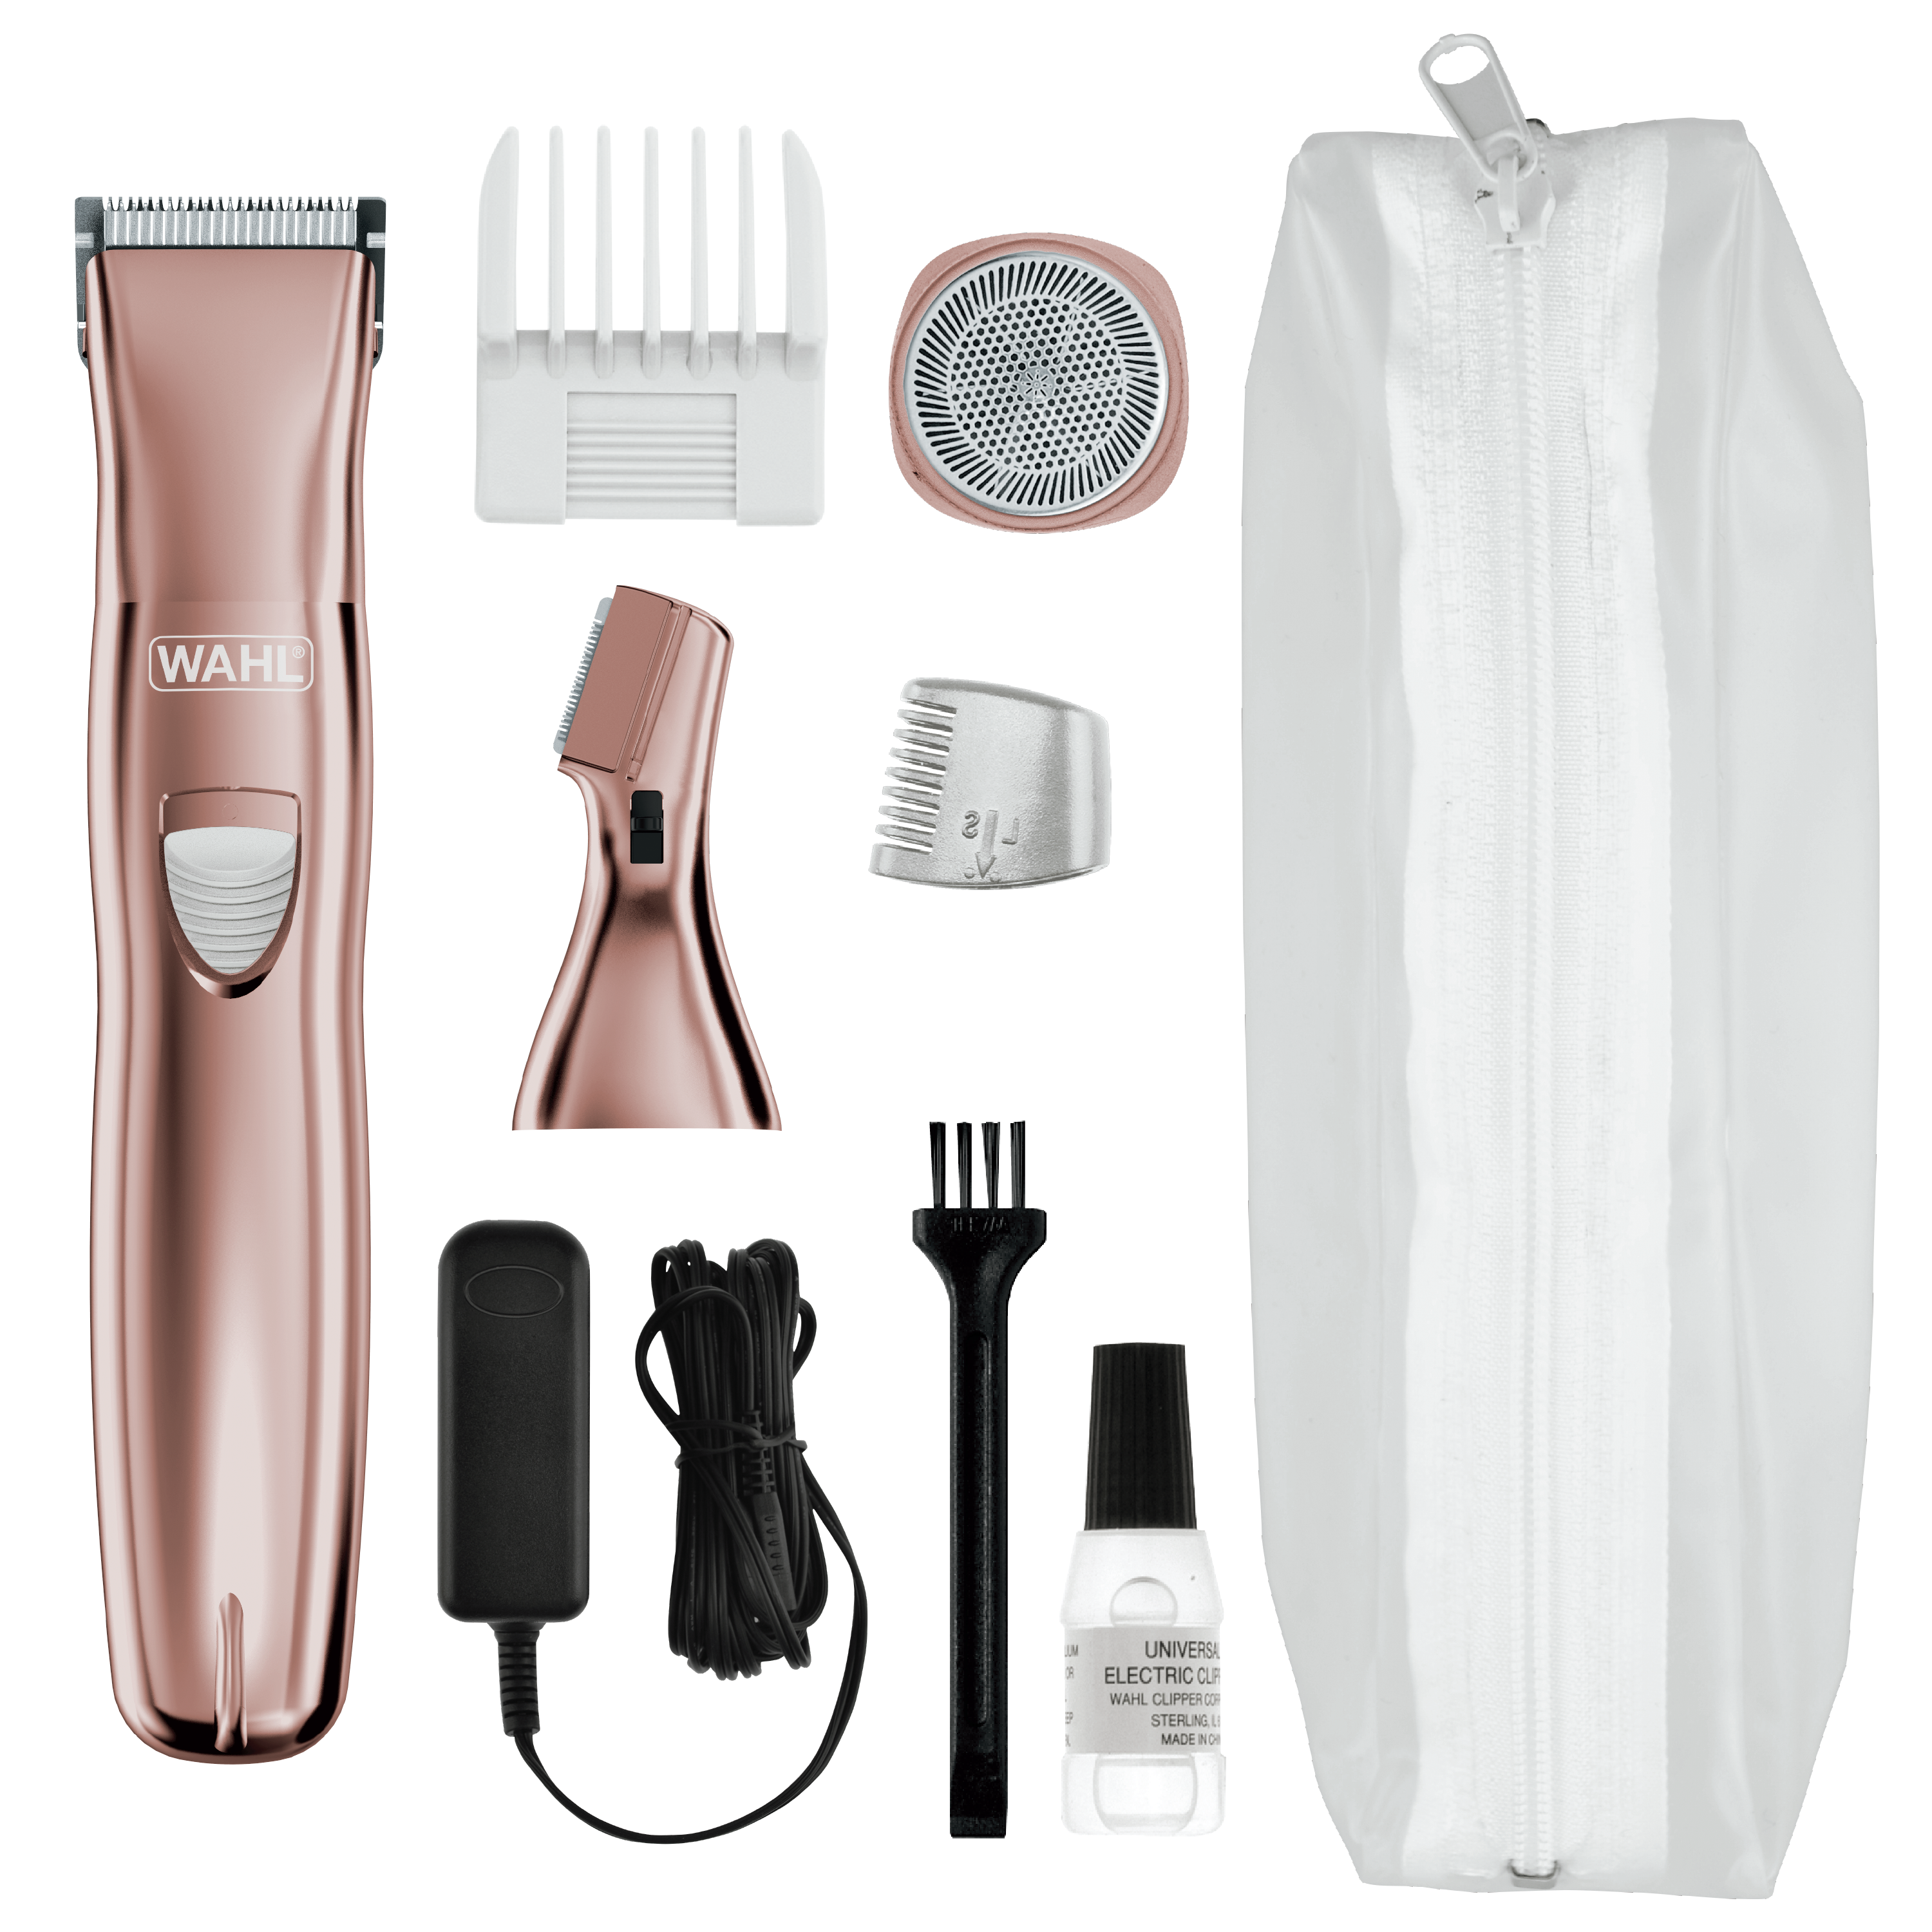 wahl personal trimmer for women